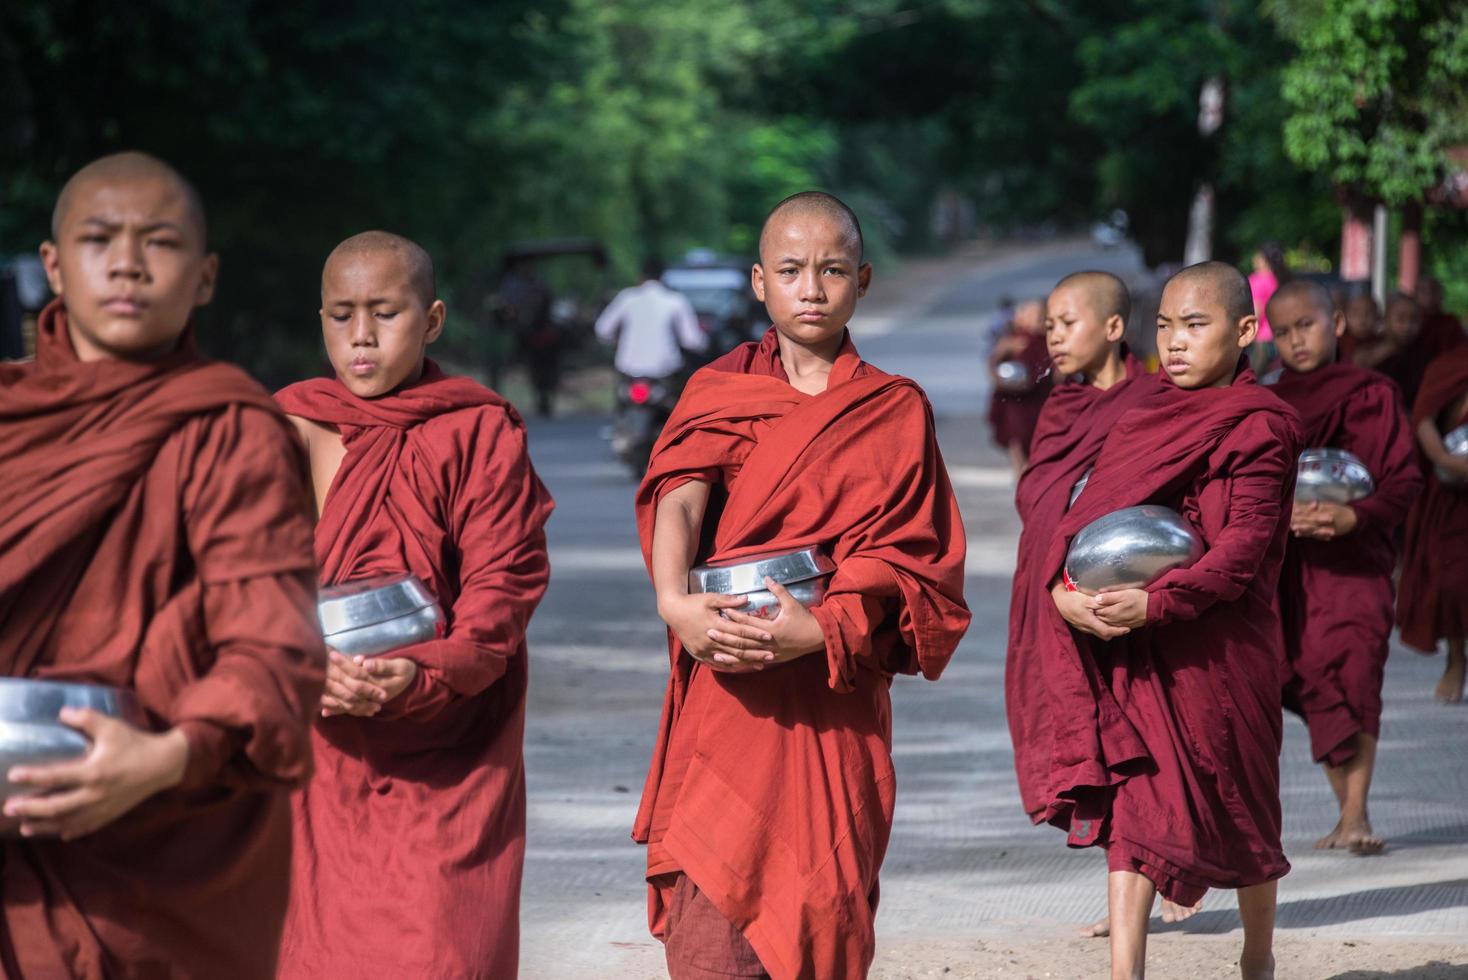 BAGAN, MYANMAR - JUL 18, 2018-Buddhist novices walk to collect alms and offerings along the road at Bagan, Myanmar. photo